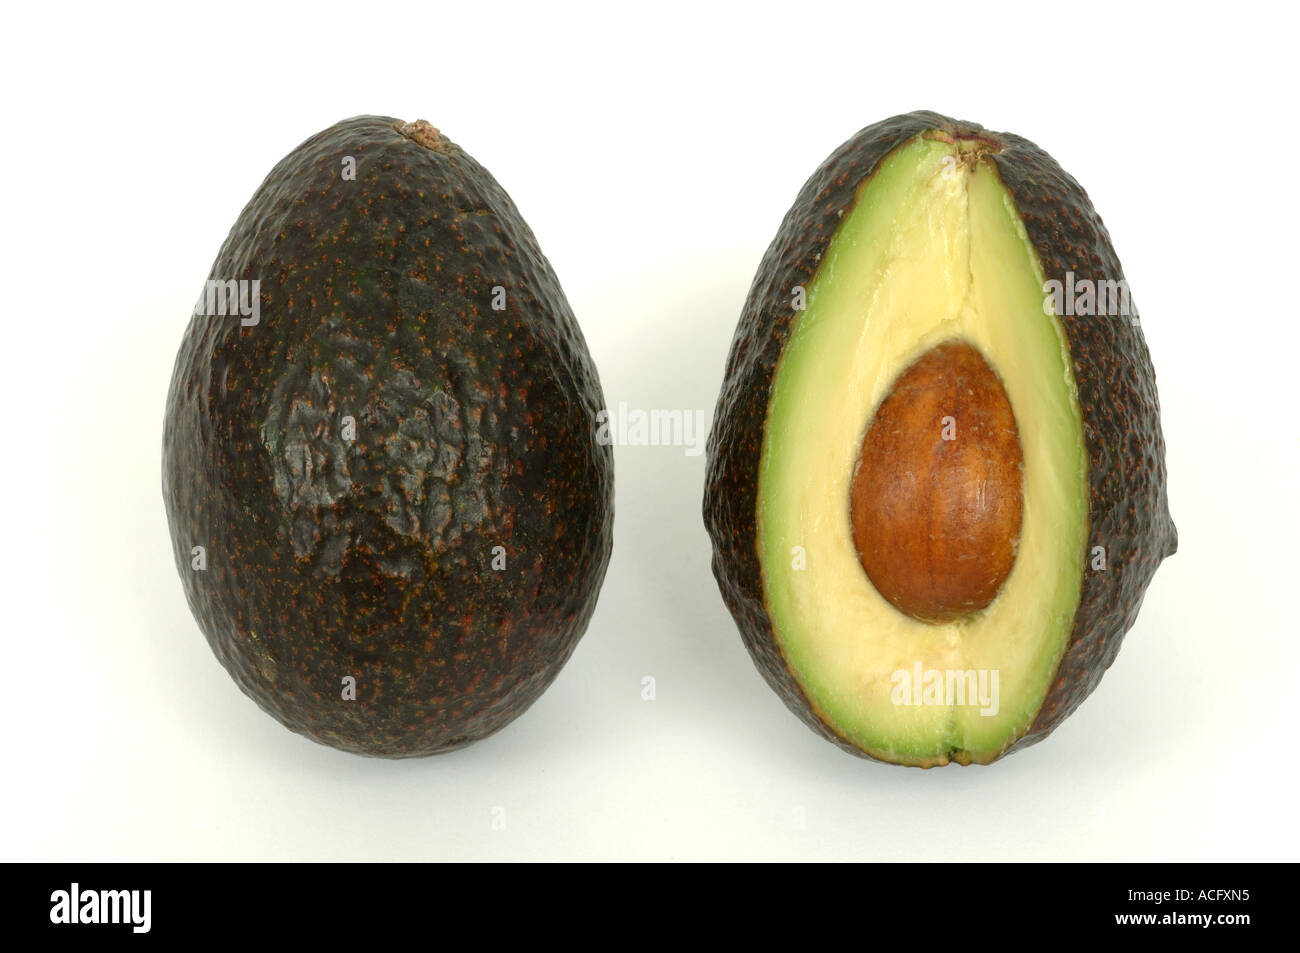 Fruit produce typical supermarket bought avocados Stock Photo